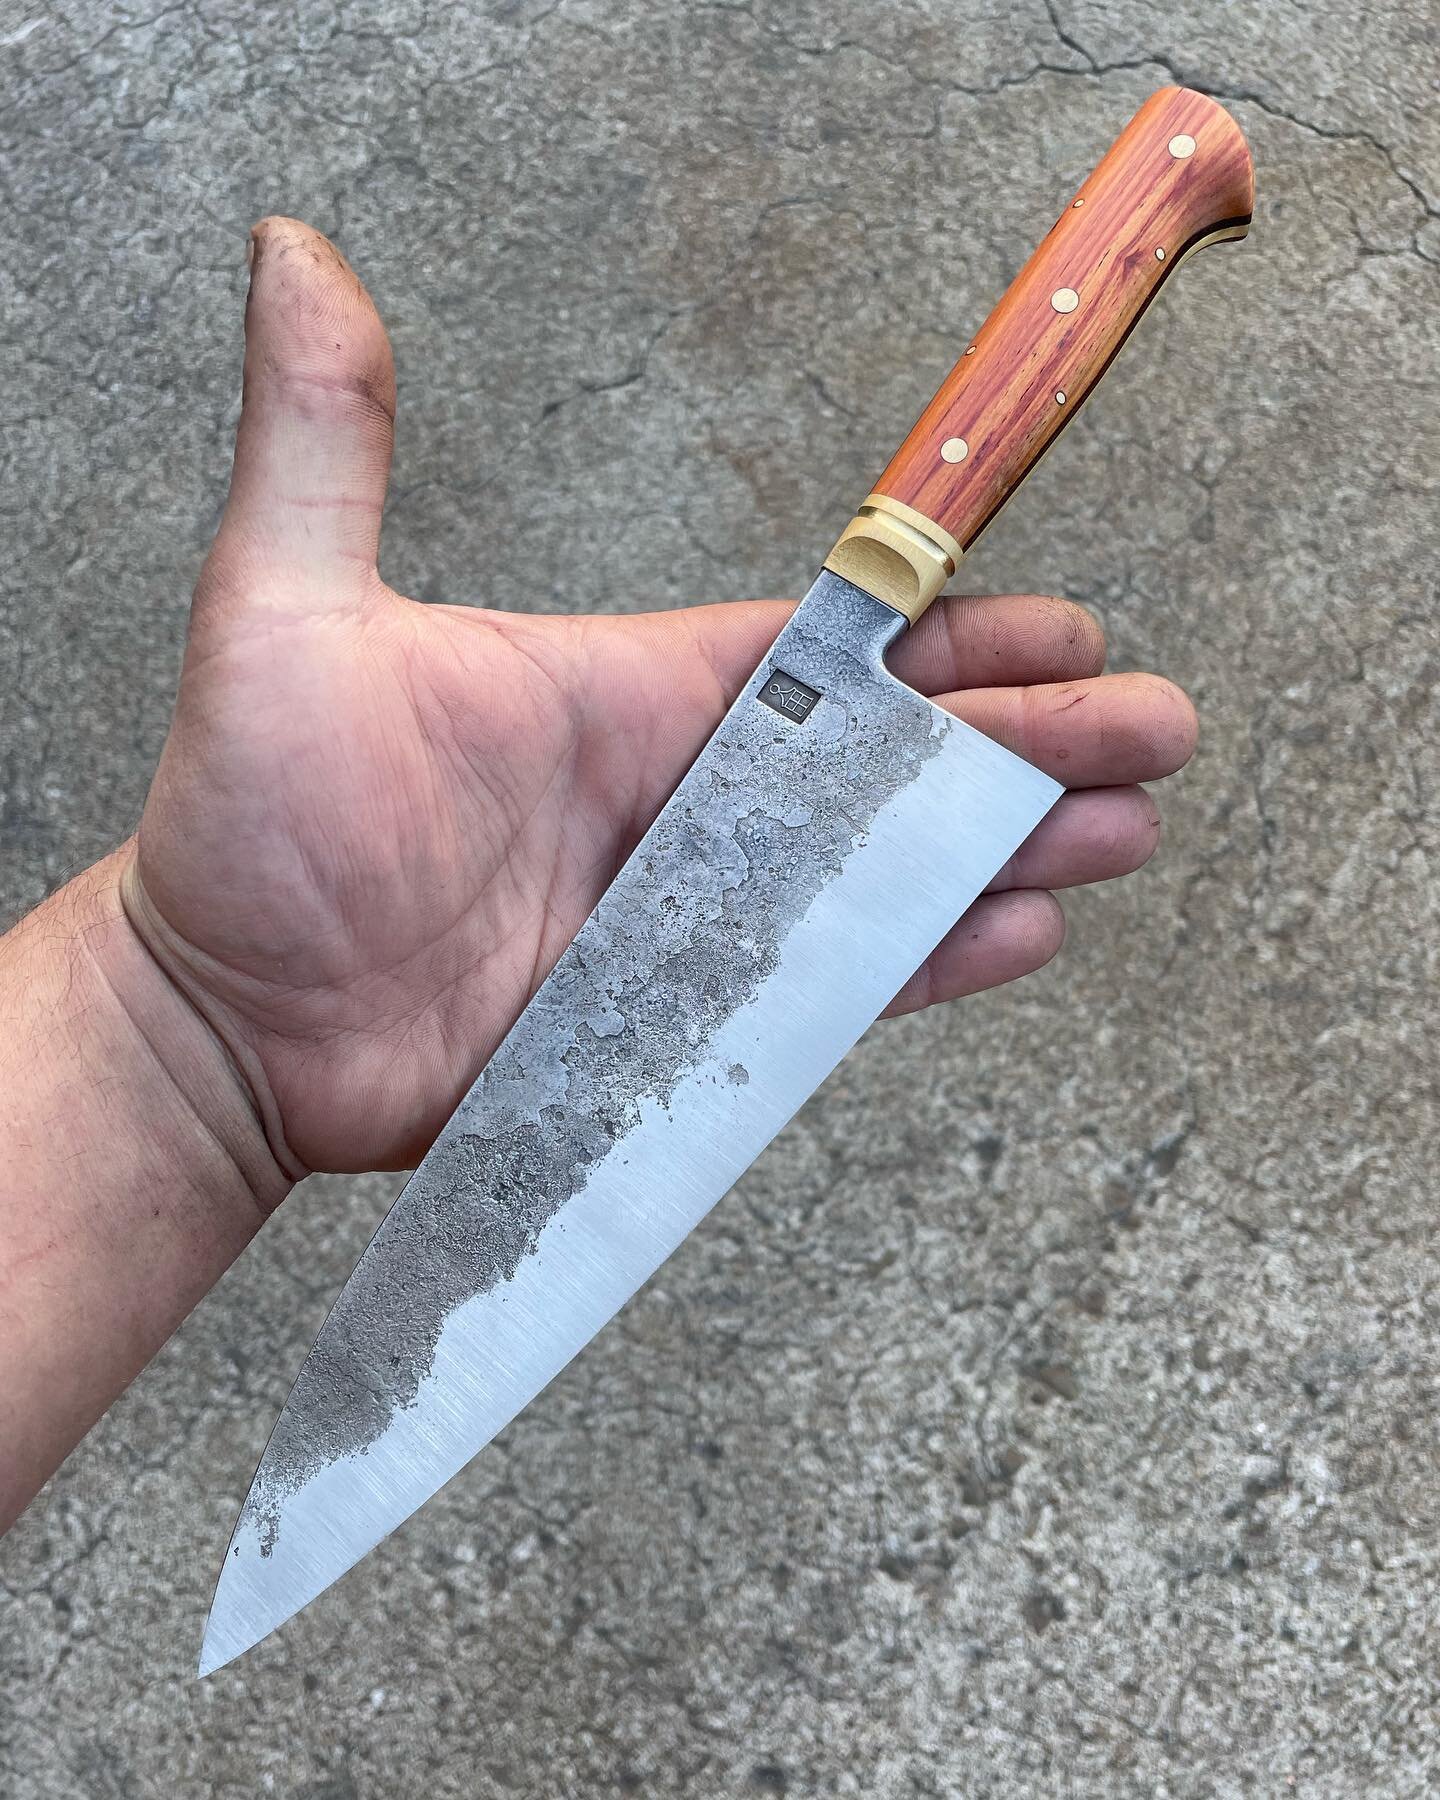 AVAILABLE:  8&rdquo; chefs knife in 52100 carbon steel with brass frame tang and bolster, tulip rosewood scales, micarta spacers and brass corby bolts and pins. DM for info. 

#carbonsteel #kitchenknife #handforged #handforgedknife  #madeinoakland